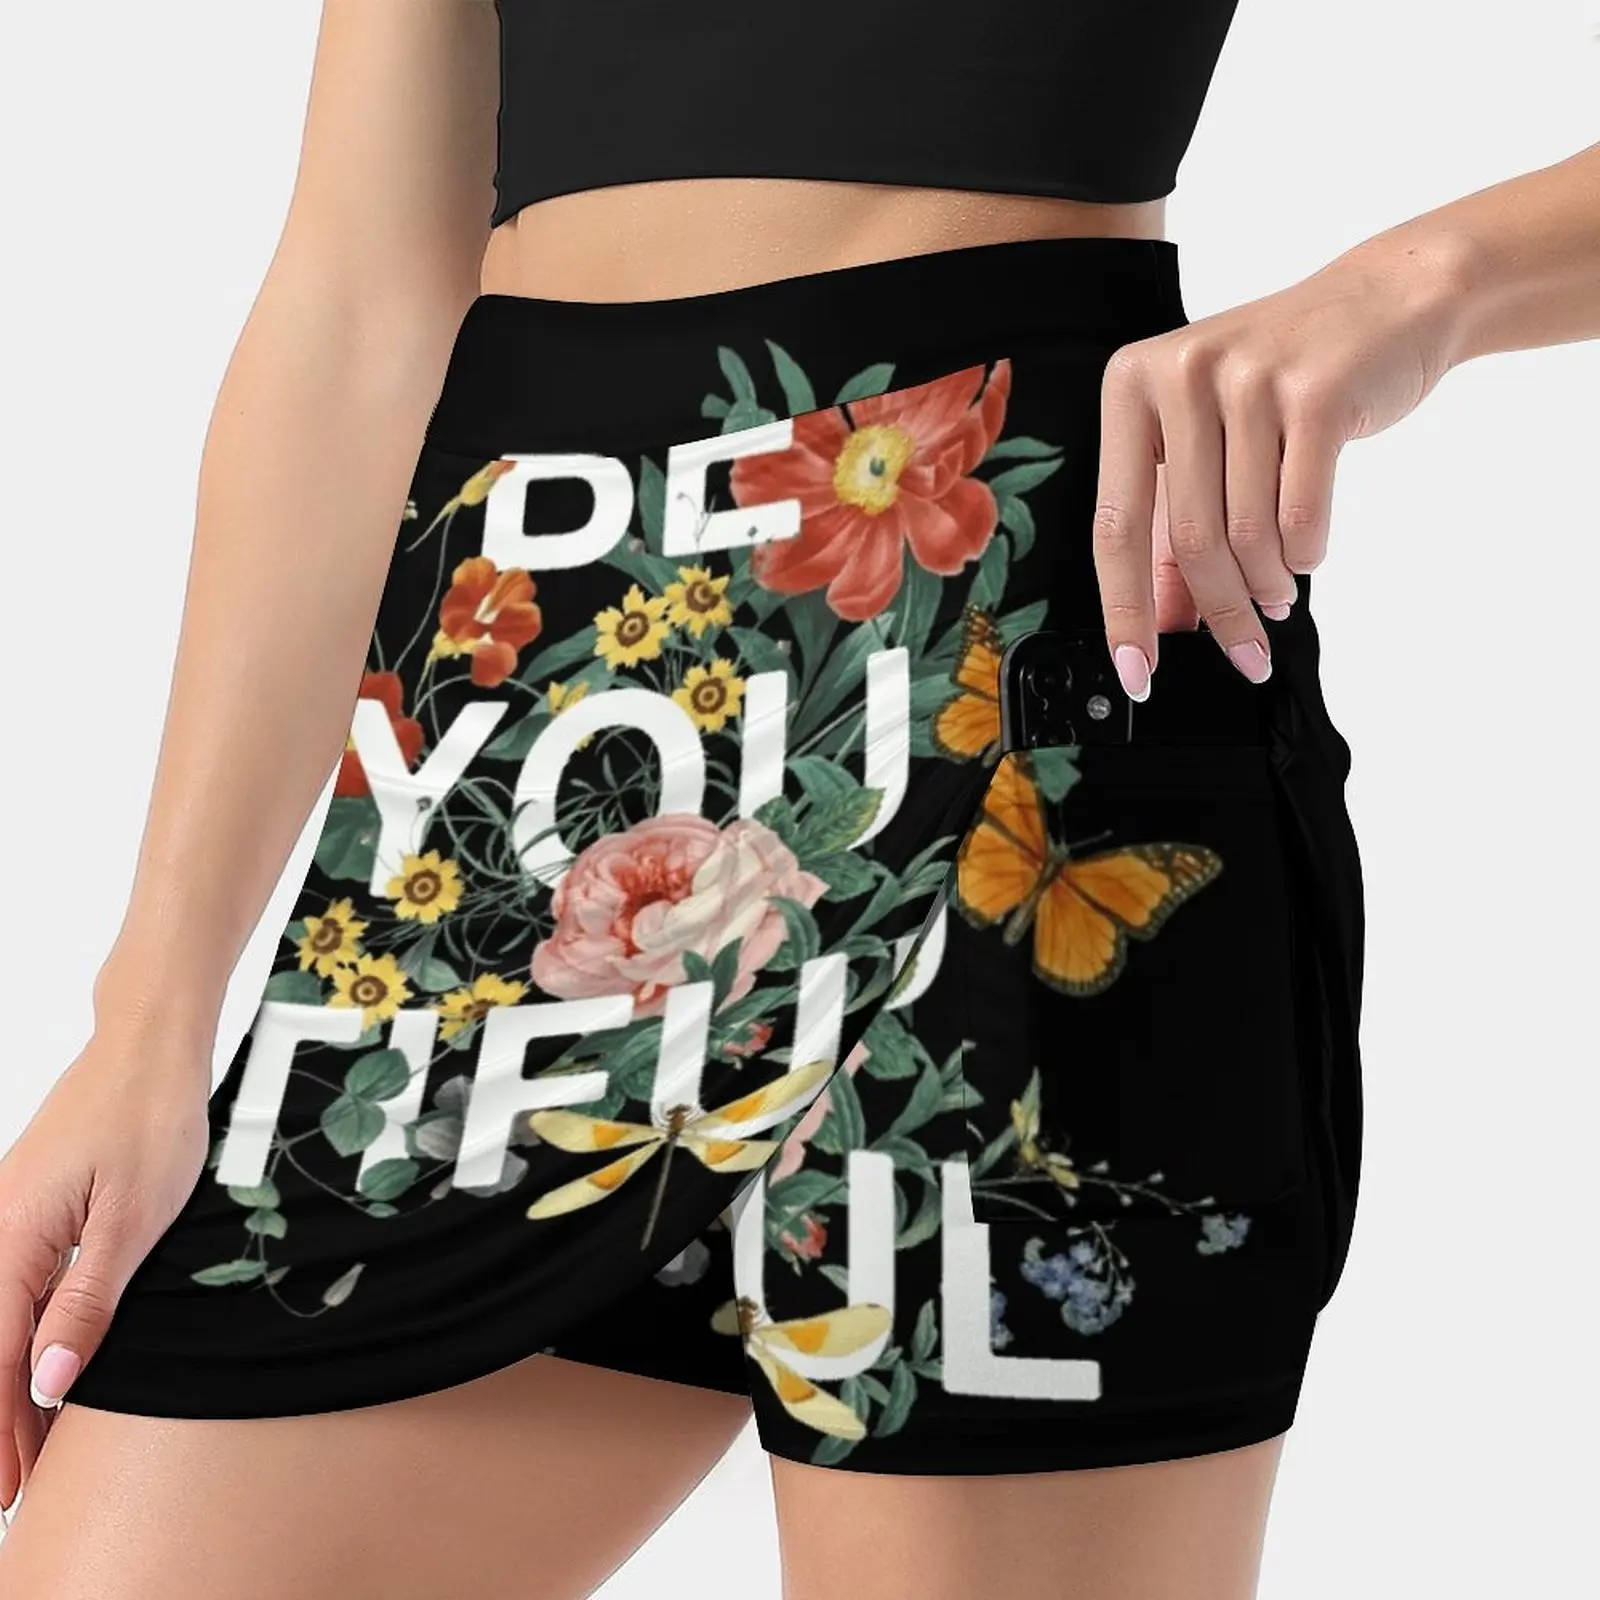 

Be You Tiful Women's skirt With Hide Pocket Tennis Skirt Golf Skirts Badminton Skirts Running skirts Typography Floral Flowers